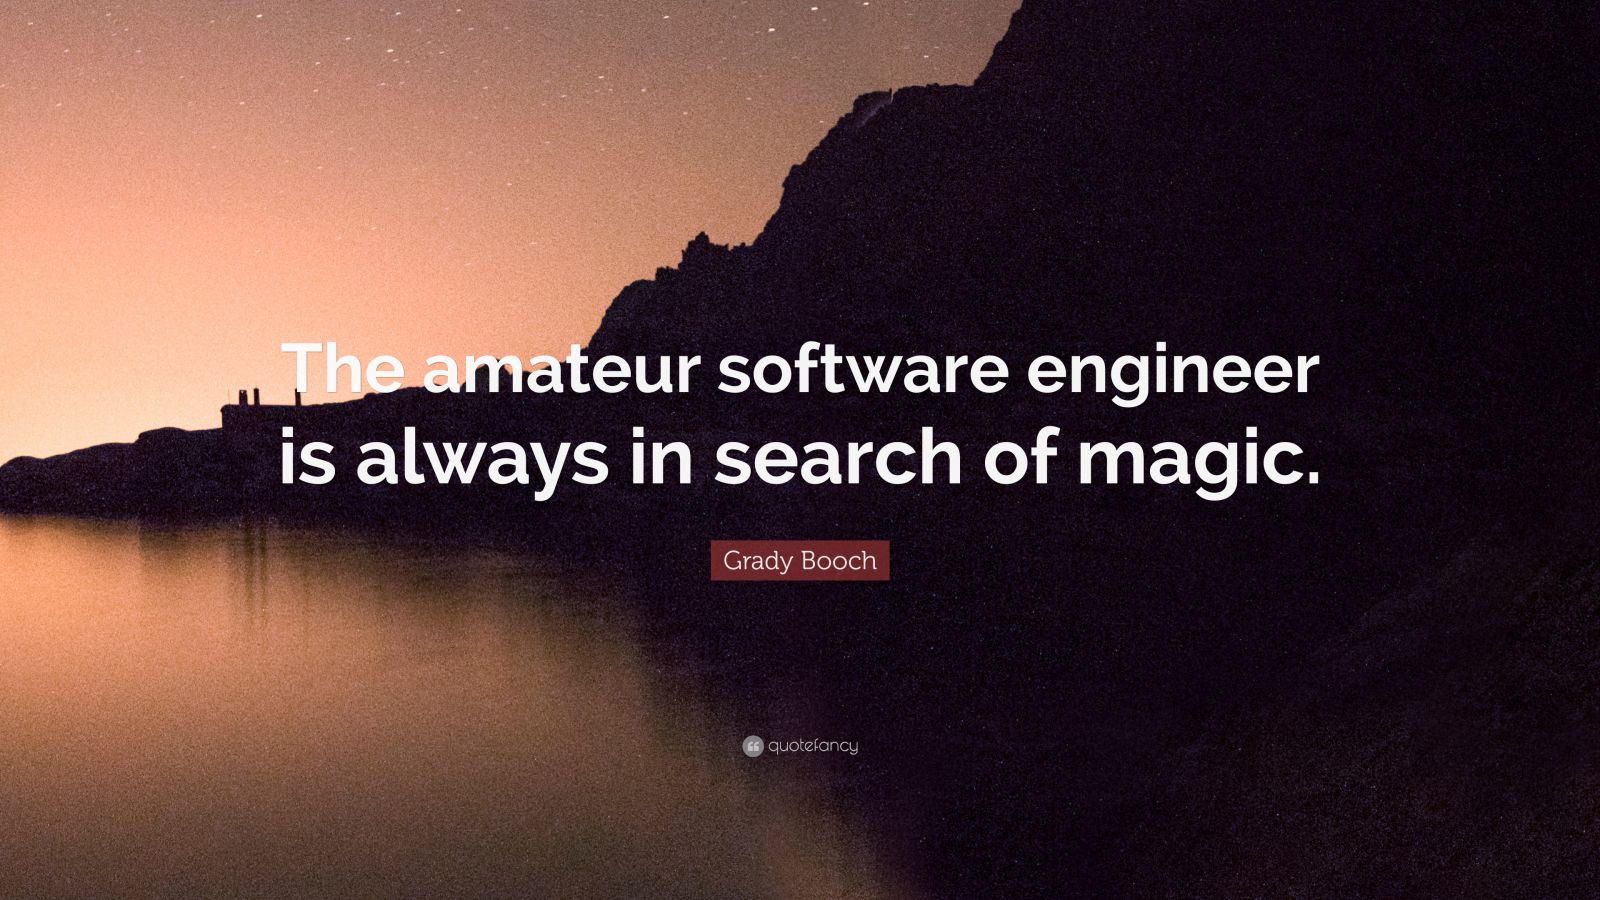 Grady Booch Quote “The amateur software engineer is